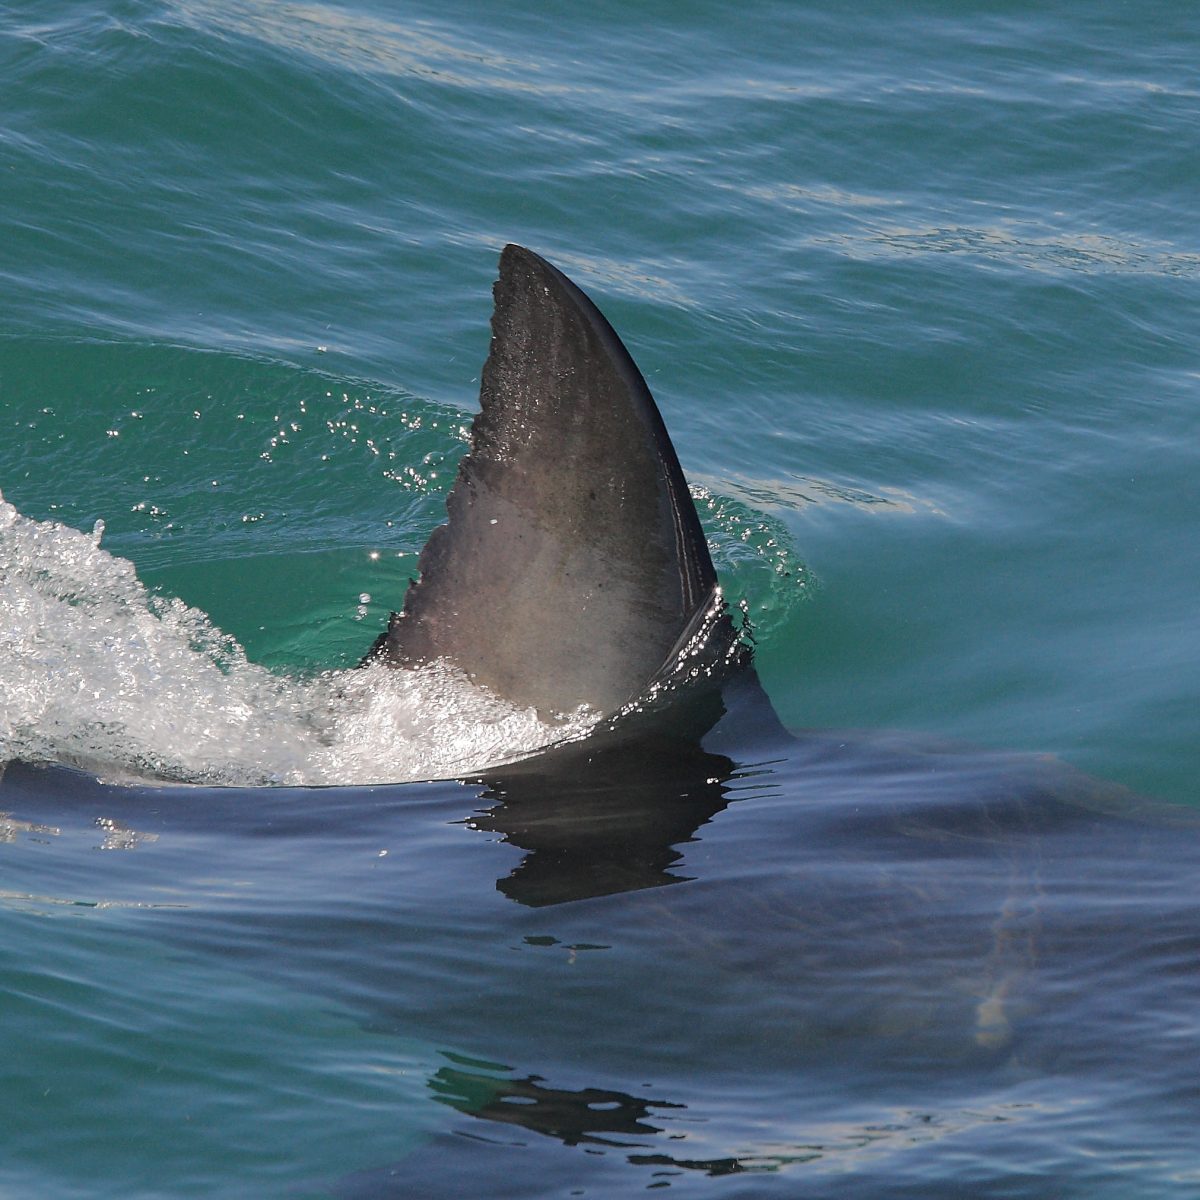 dorsal fin of great white shark, Carcharodon carcharias, False Bay, South Africa